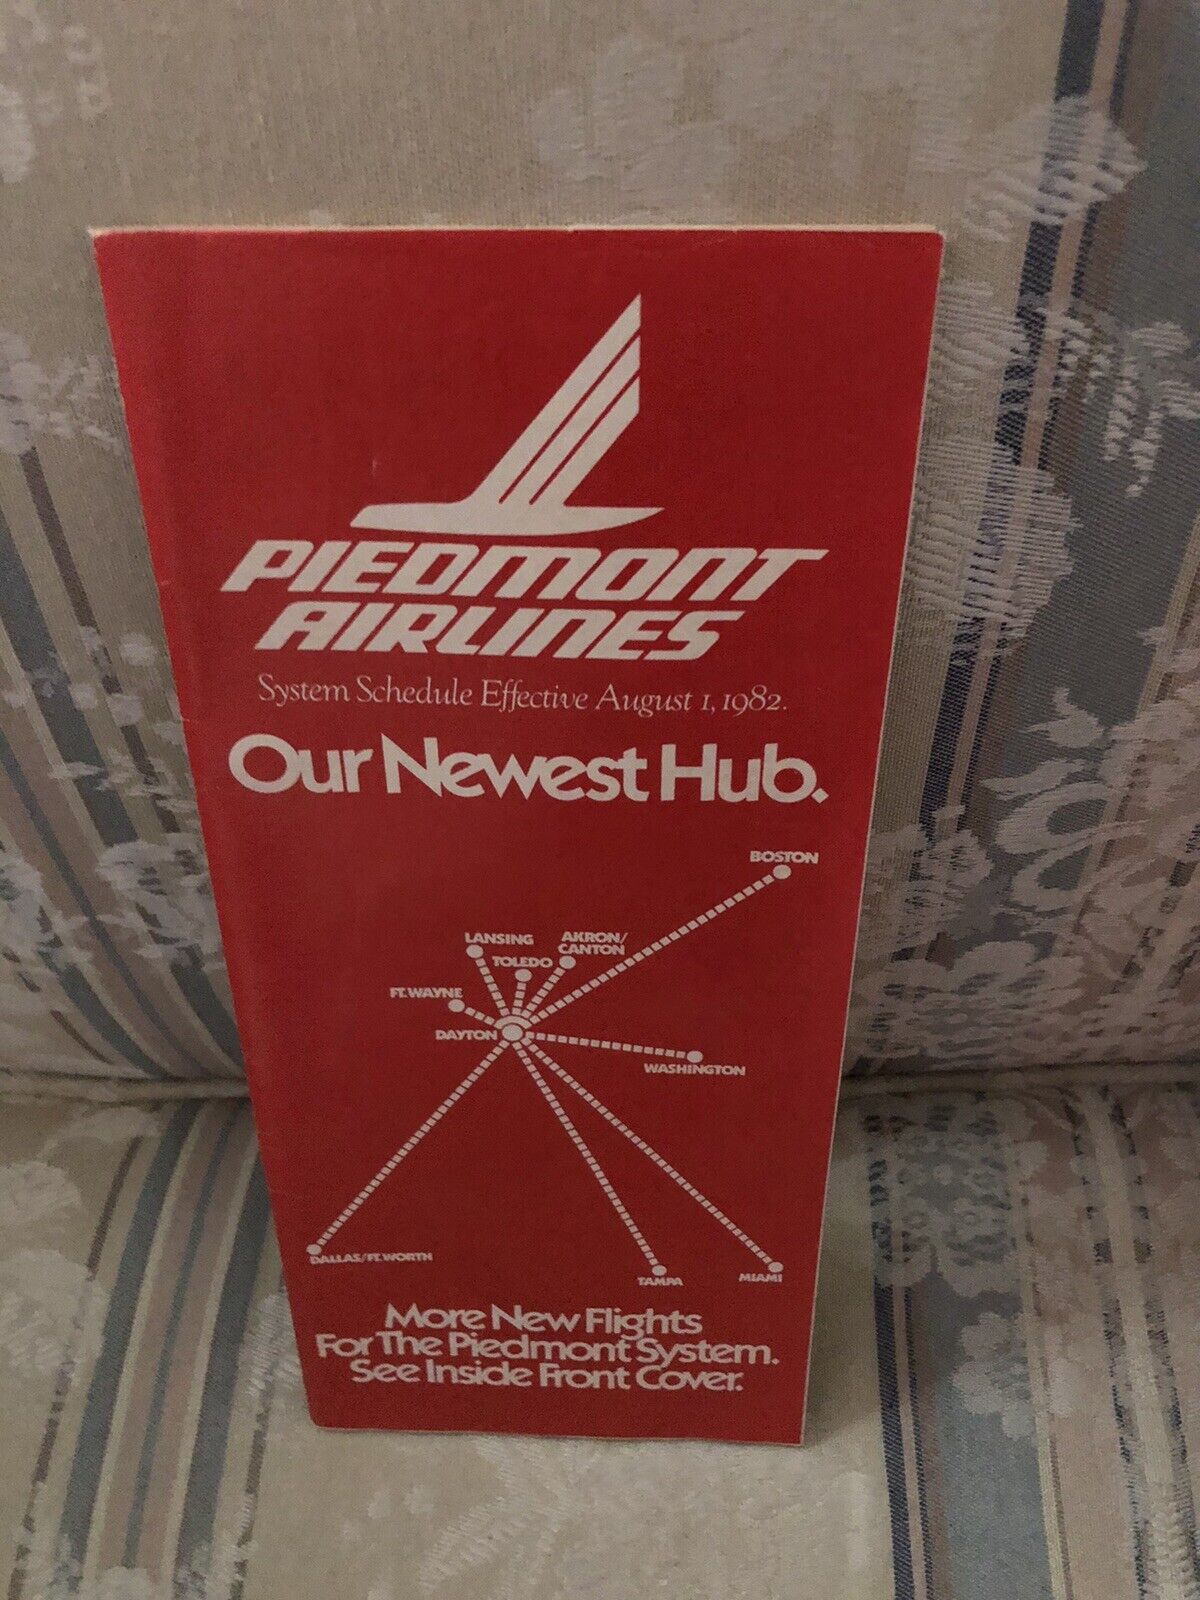 Piedmont Airlines System Schedule (Timetable) August 1, 1982 “Our Newest Hub” 